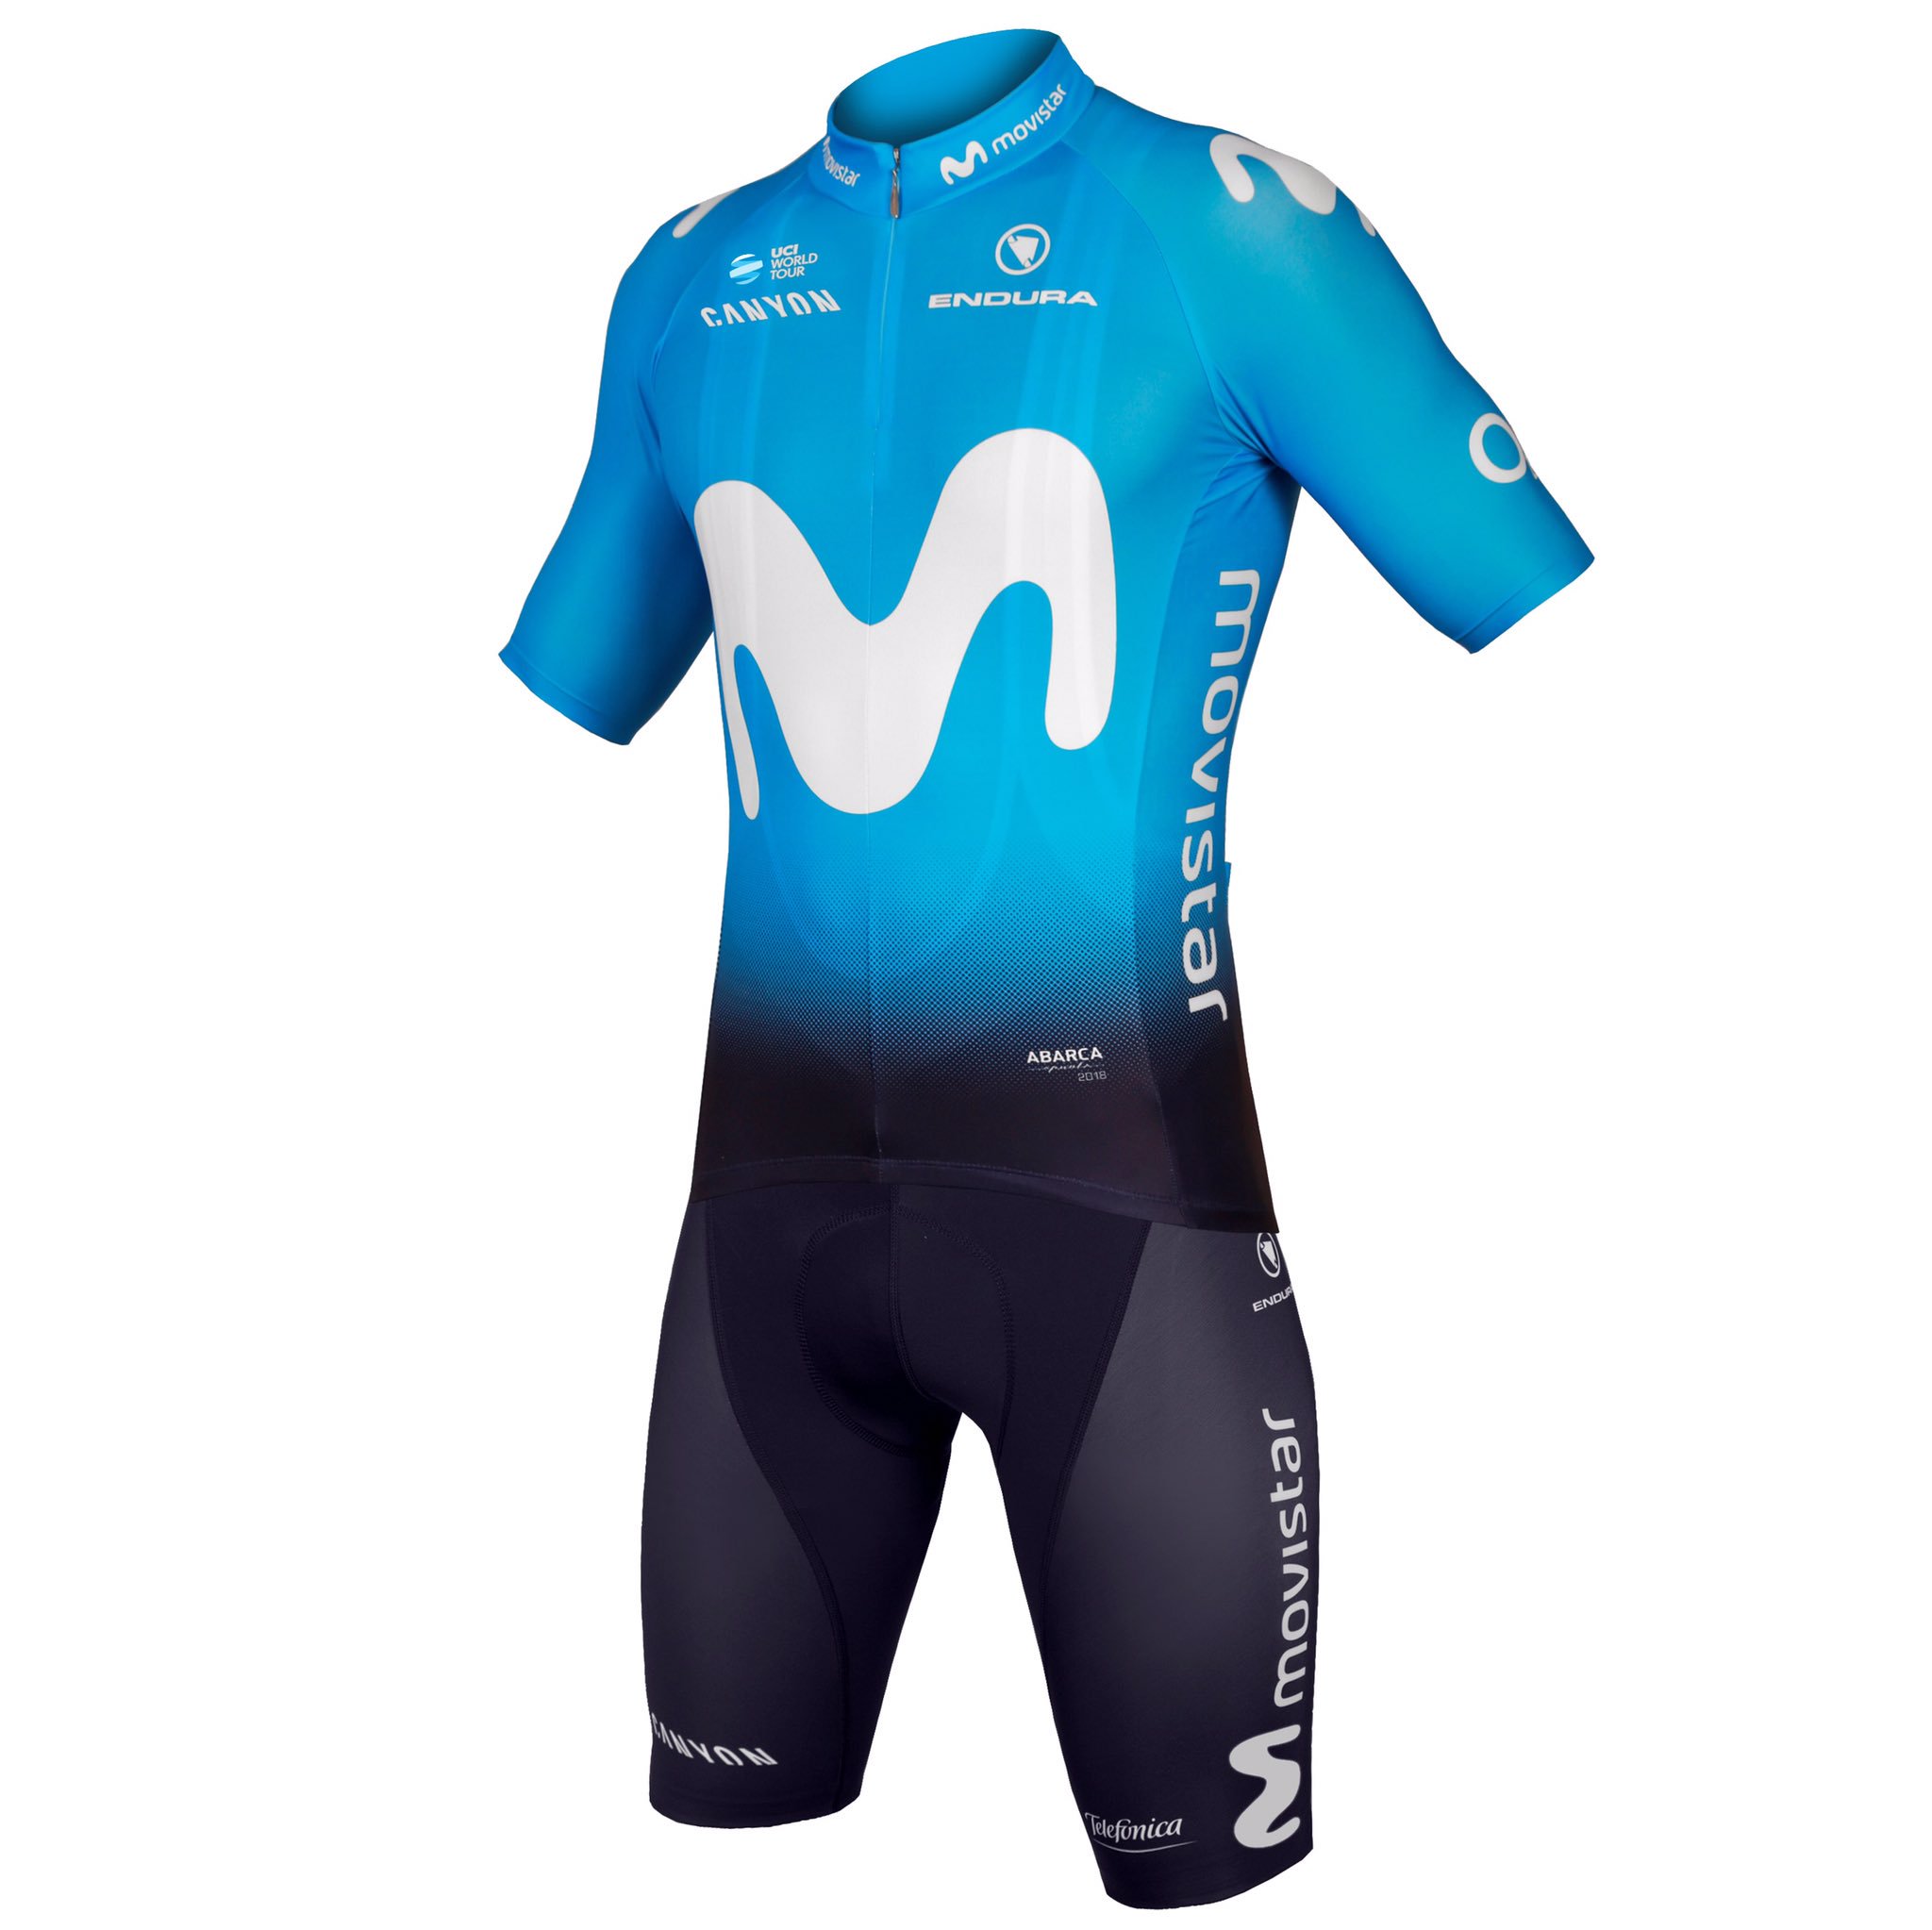 Movistar Team on Twitter: proud to unveil our all-new kit for 2018, designed and made @Endura in Scotland! #SomosMovistarTeam / Twitter